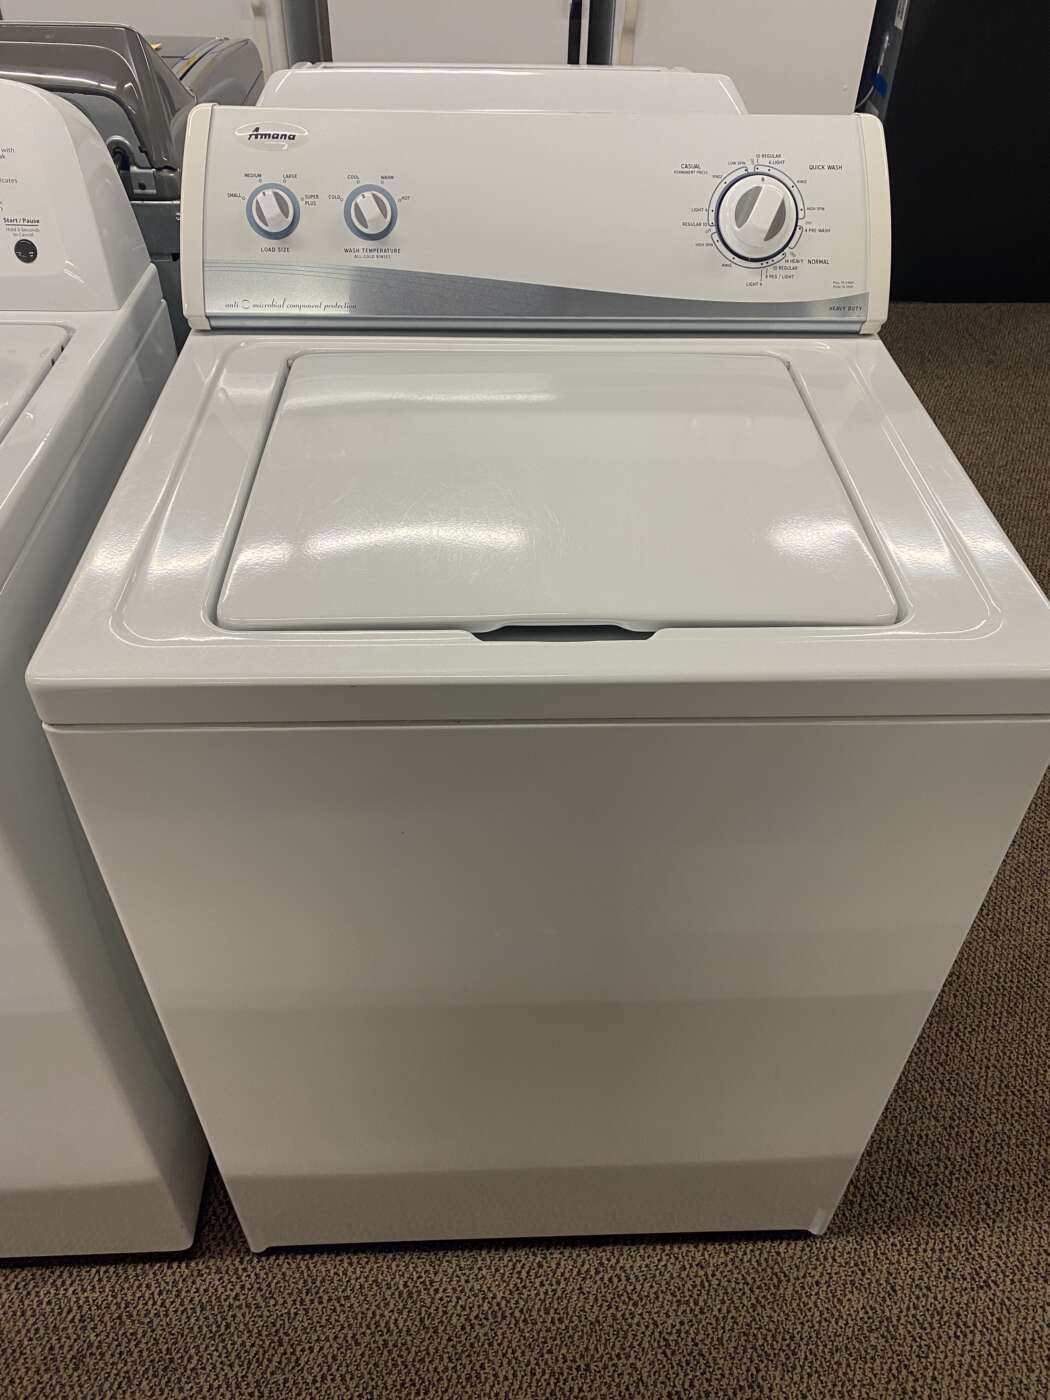 Reconditioned AMANA 3.2 Cu. Ft. Top-Load Washer